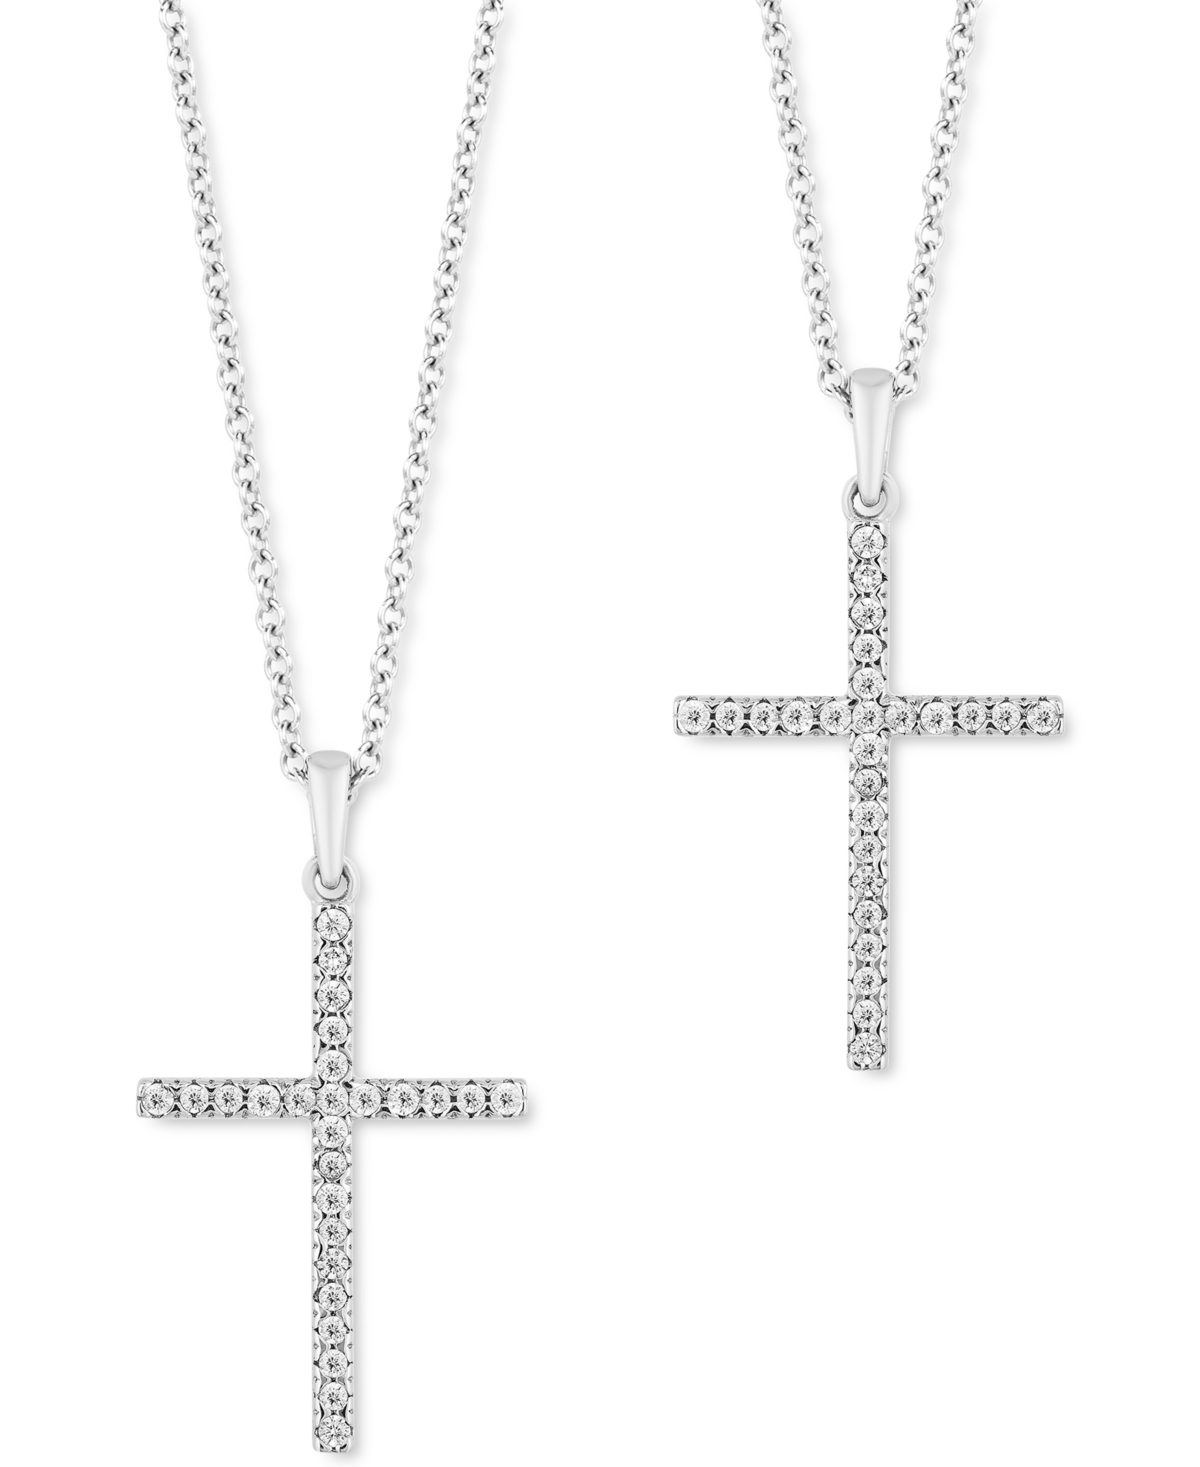 Hallmark Diamonds 2-Pc. Set Diamond "Wear One Share One" Cross Pendant Necklaces (1/5 ct.tw) in Sterling Silver, 16" + 2" extender